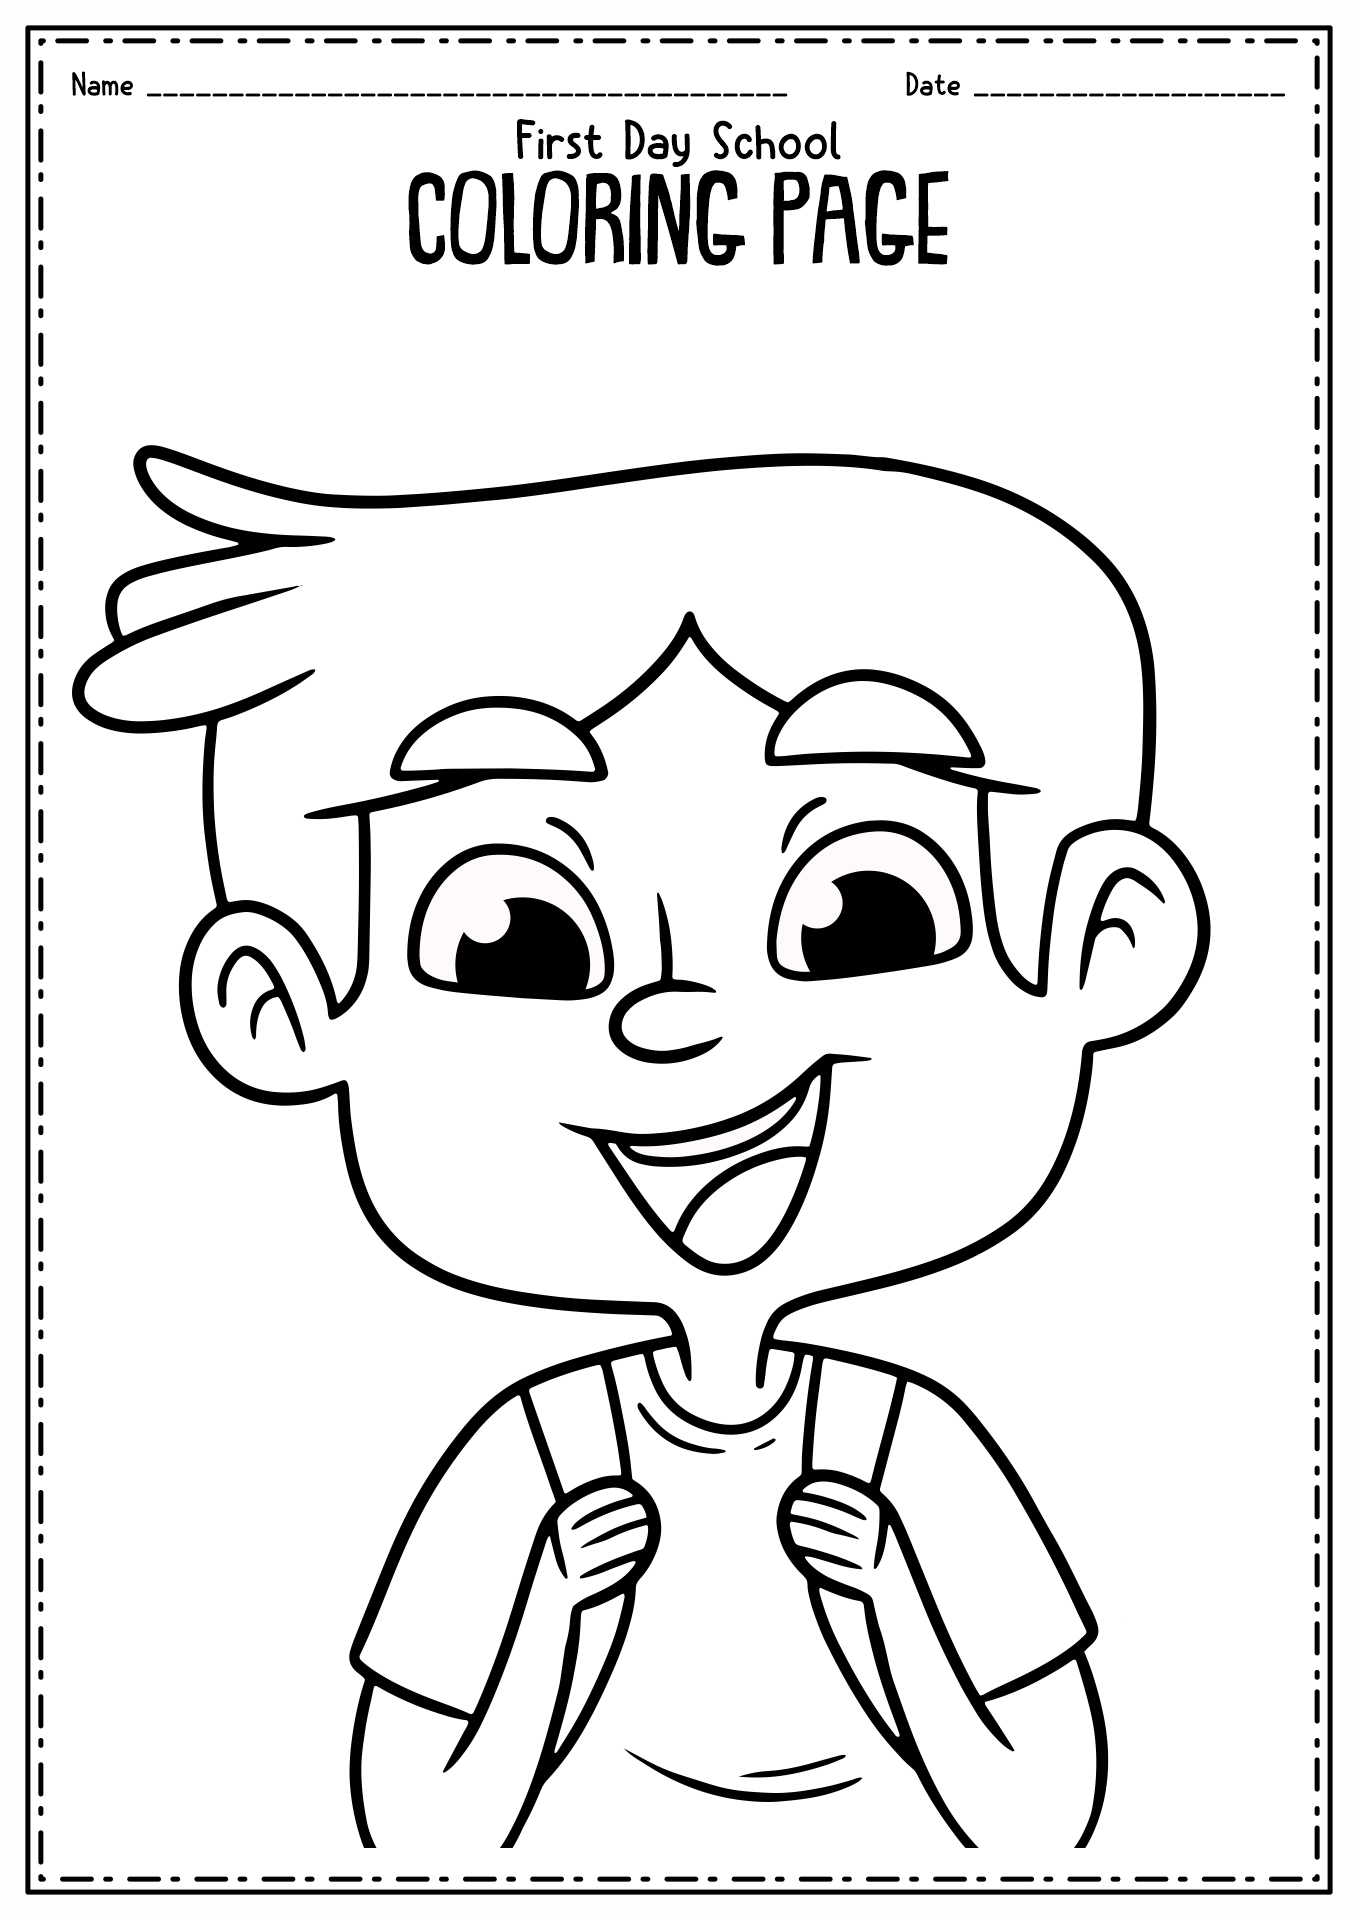 My First Day of School Coloring Page Image